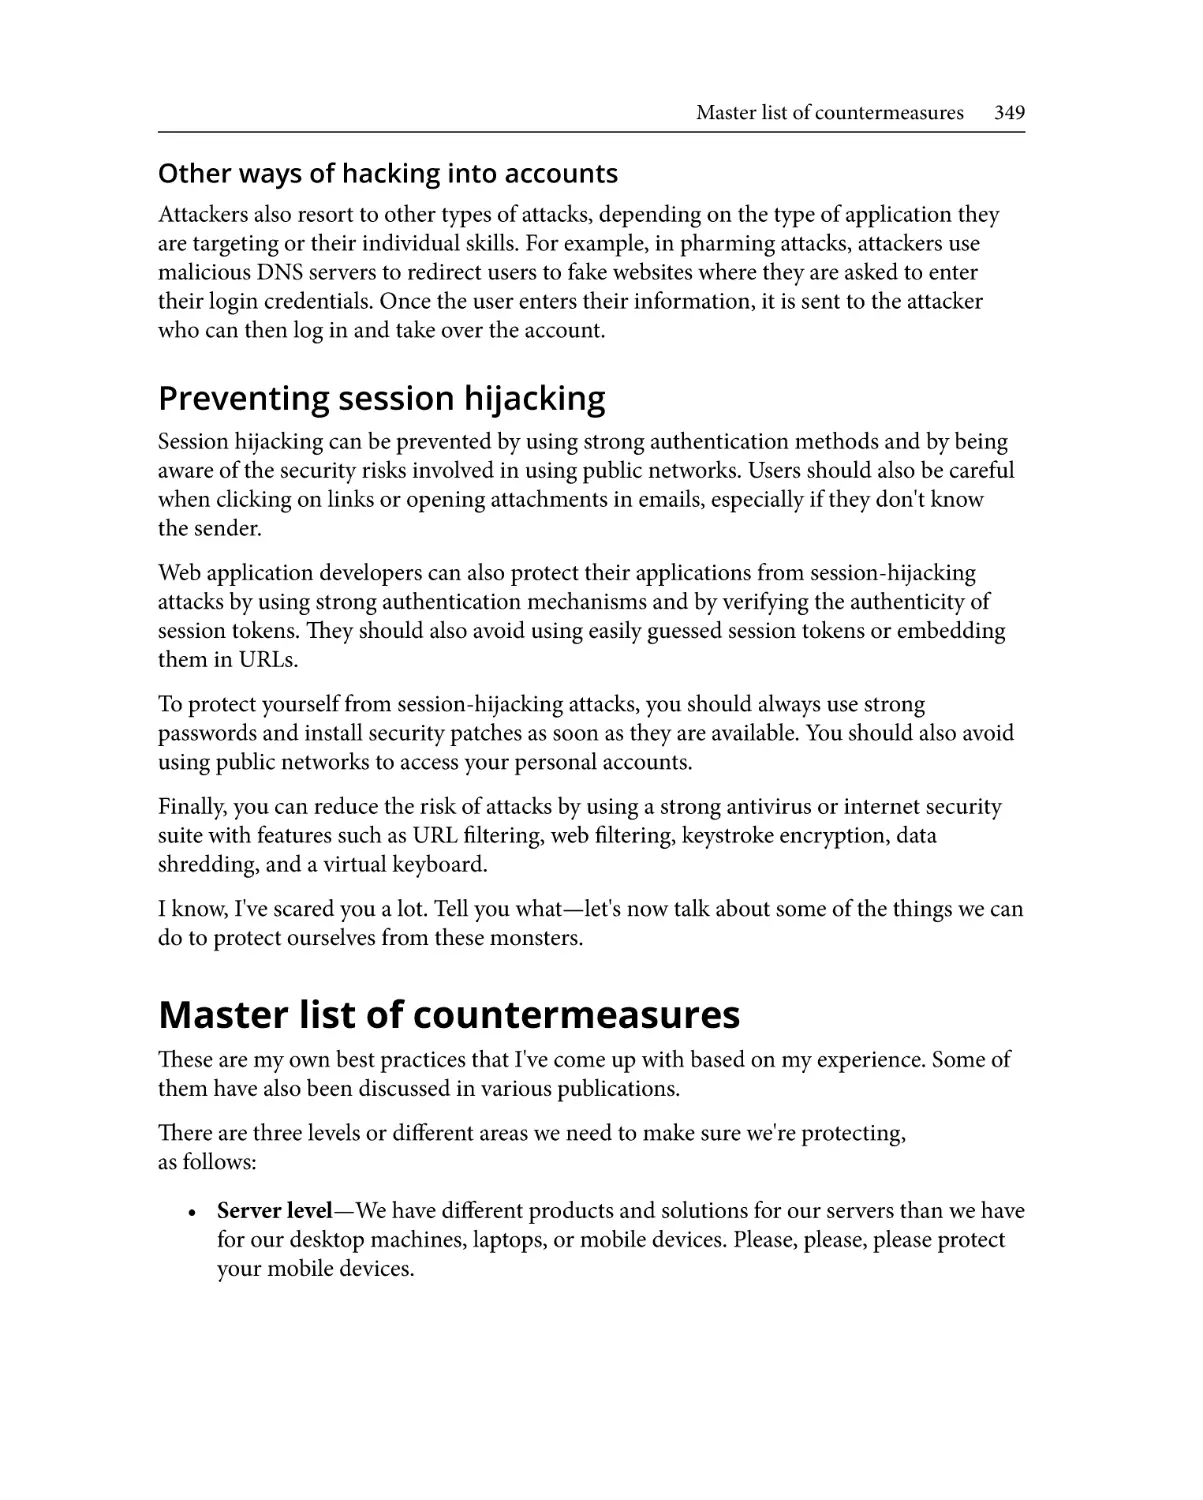 Preventing session hijacking
Master list of countermeasures